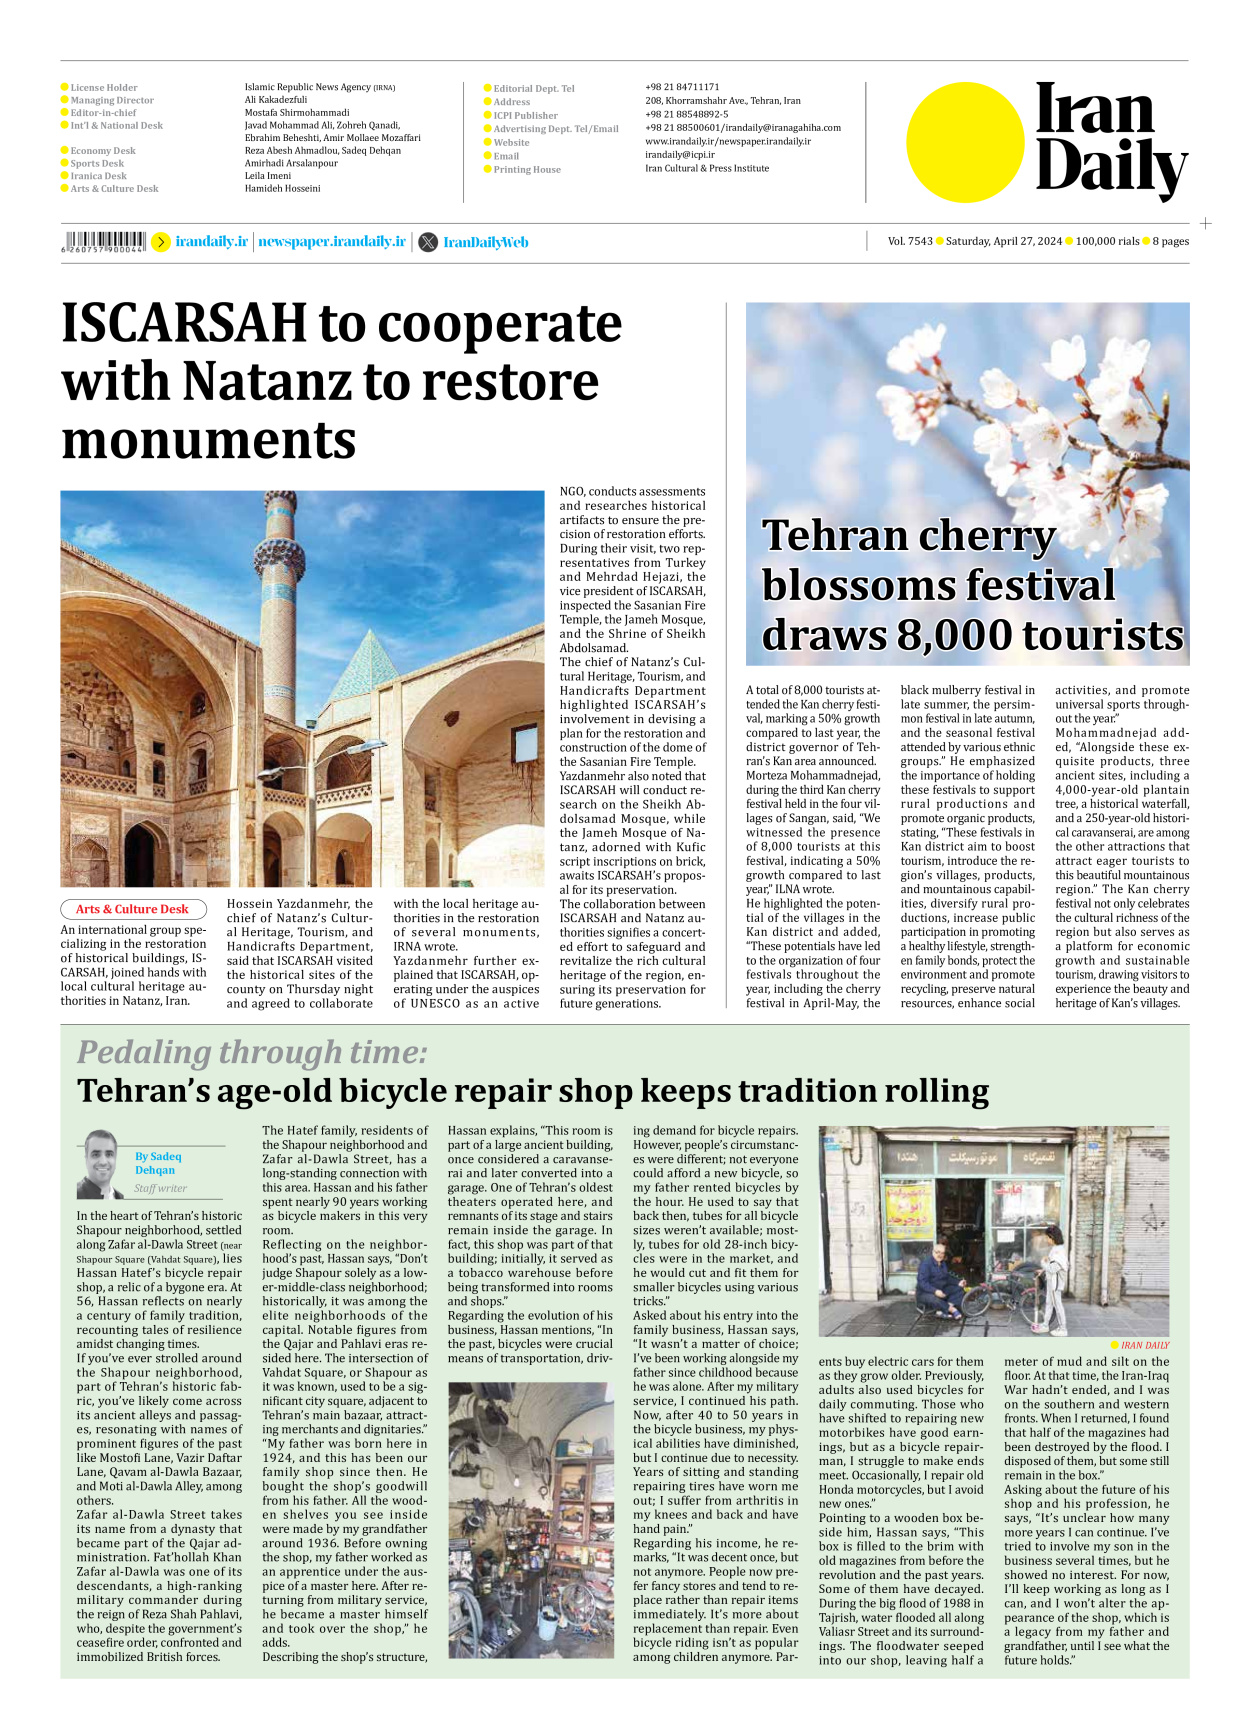 Iran Daily - Number Seven Thousand Five Hundred and Forty Three - 27 April 2024 - Page 8